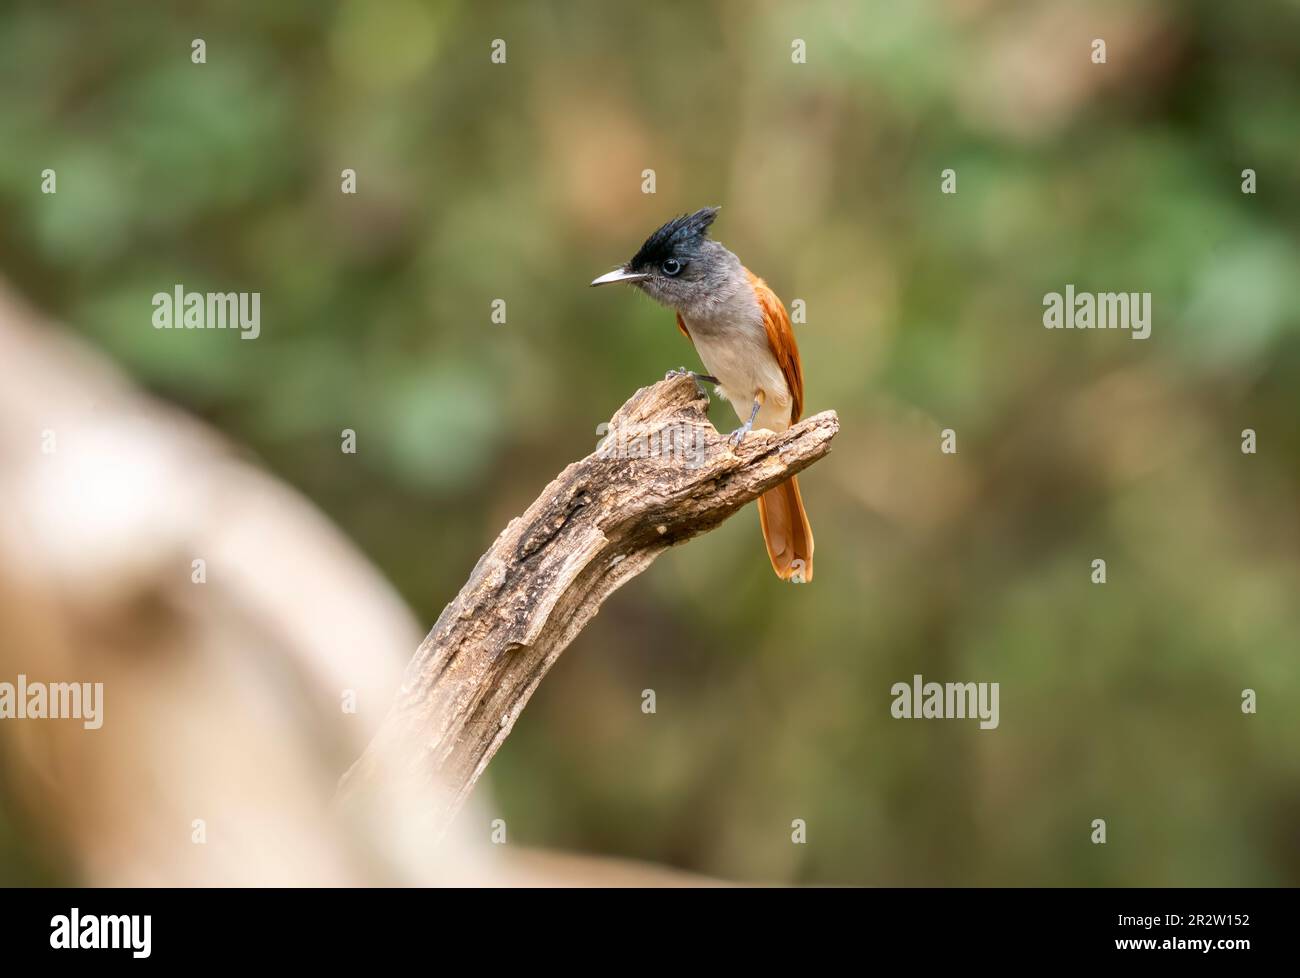 An Asian paradise flycatcher female bird is perched on a tree branch on the outskirts of Thattekad, Kerala Stock Photo